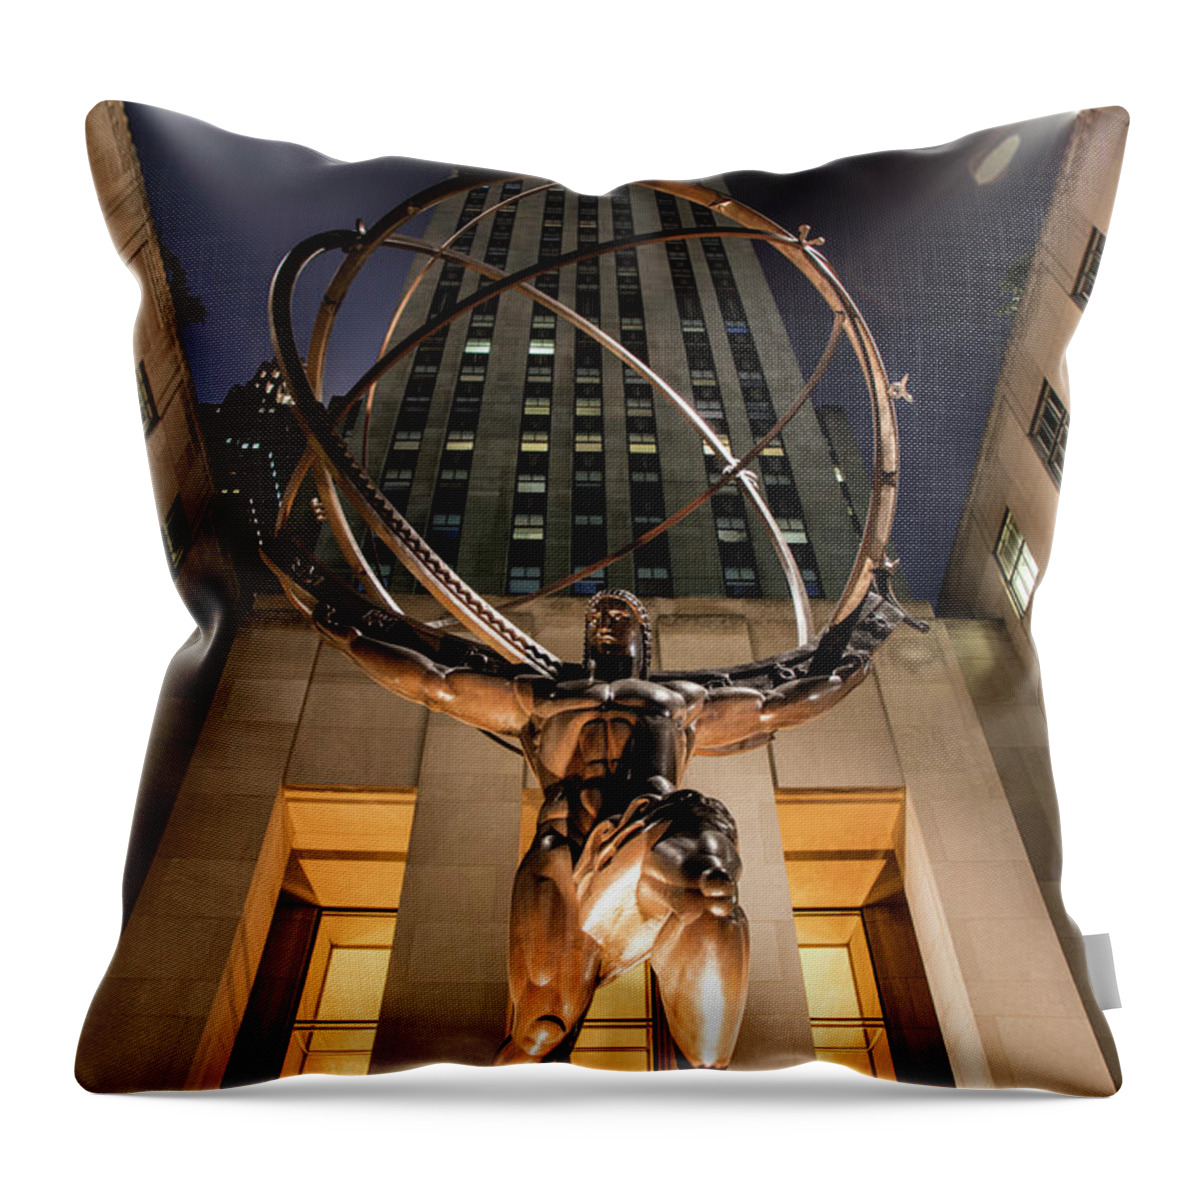 Nyc Throw Pillow featuring the photograph Rockefeller Center NYC by John McGraw